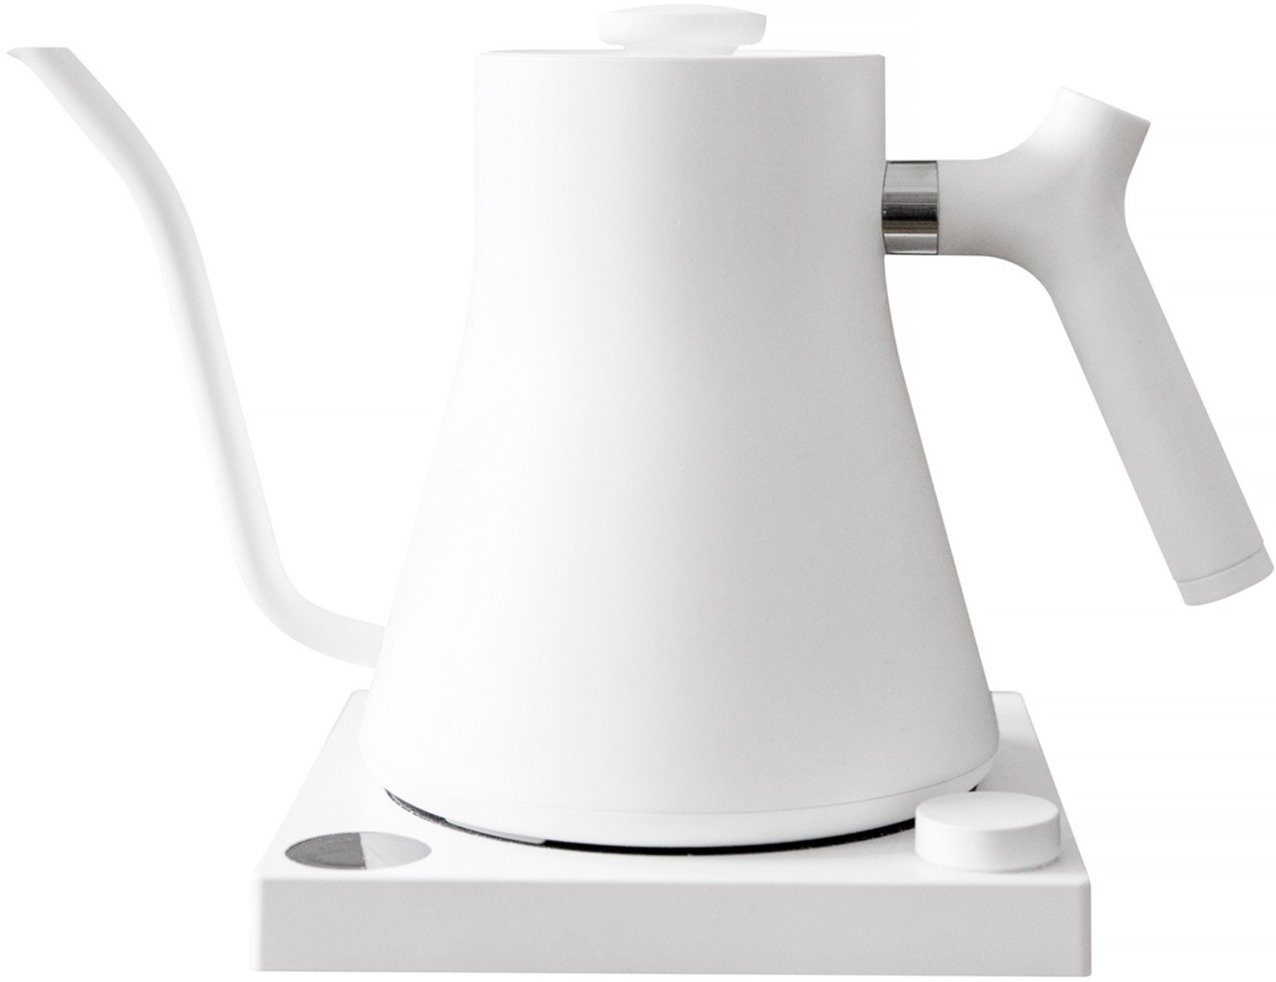 electric kettle with variable temperature